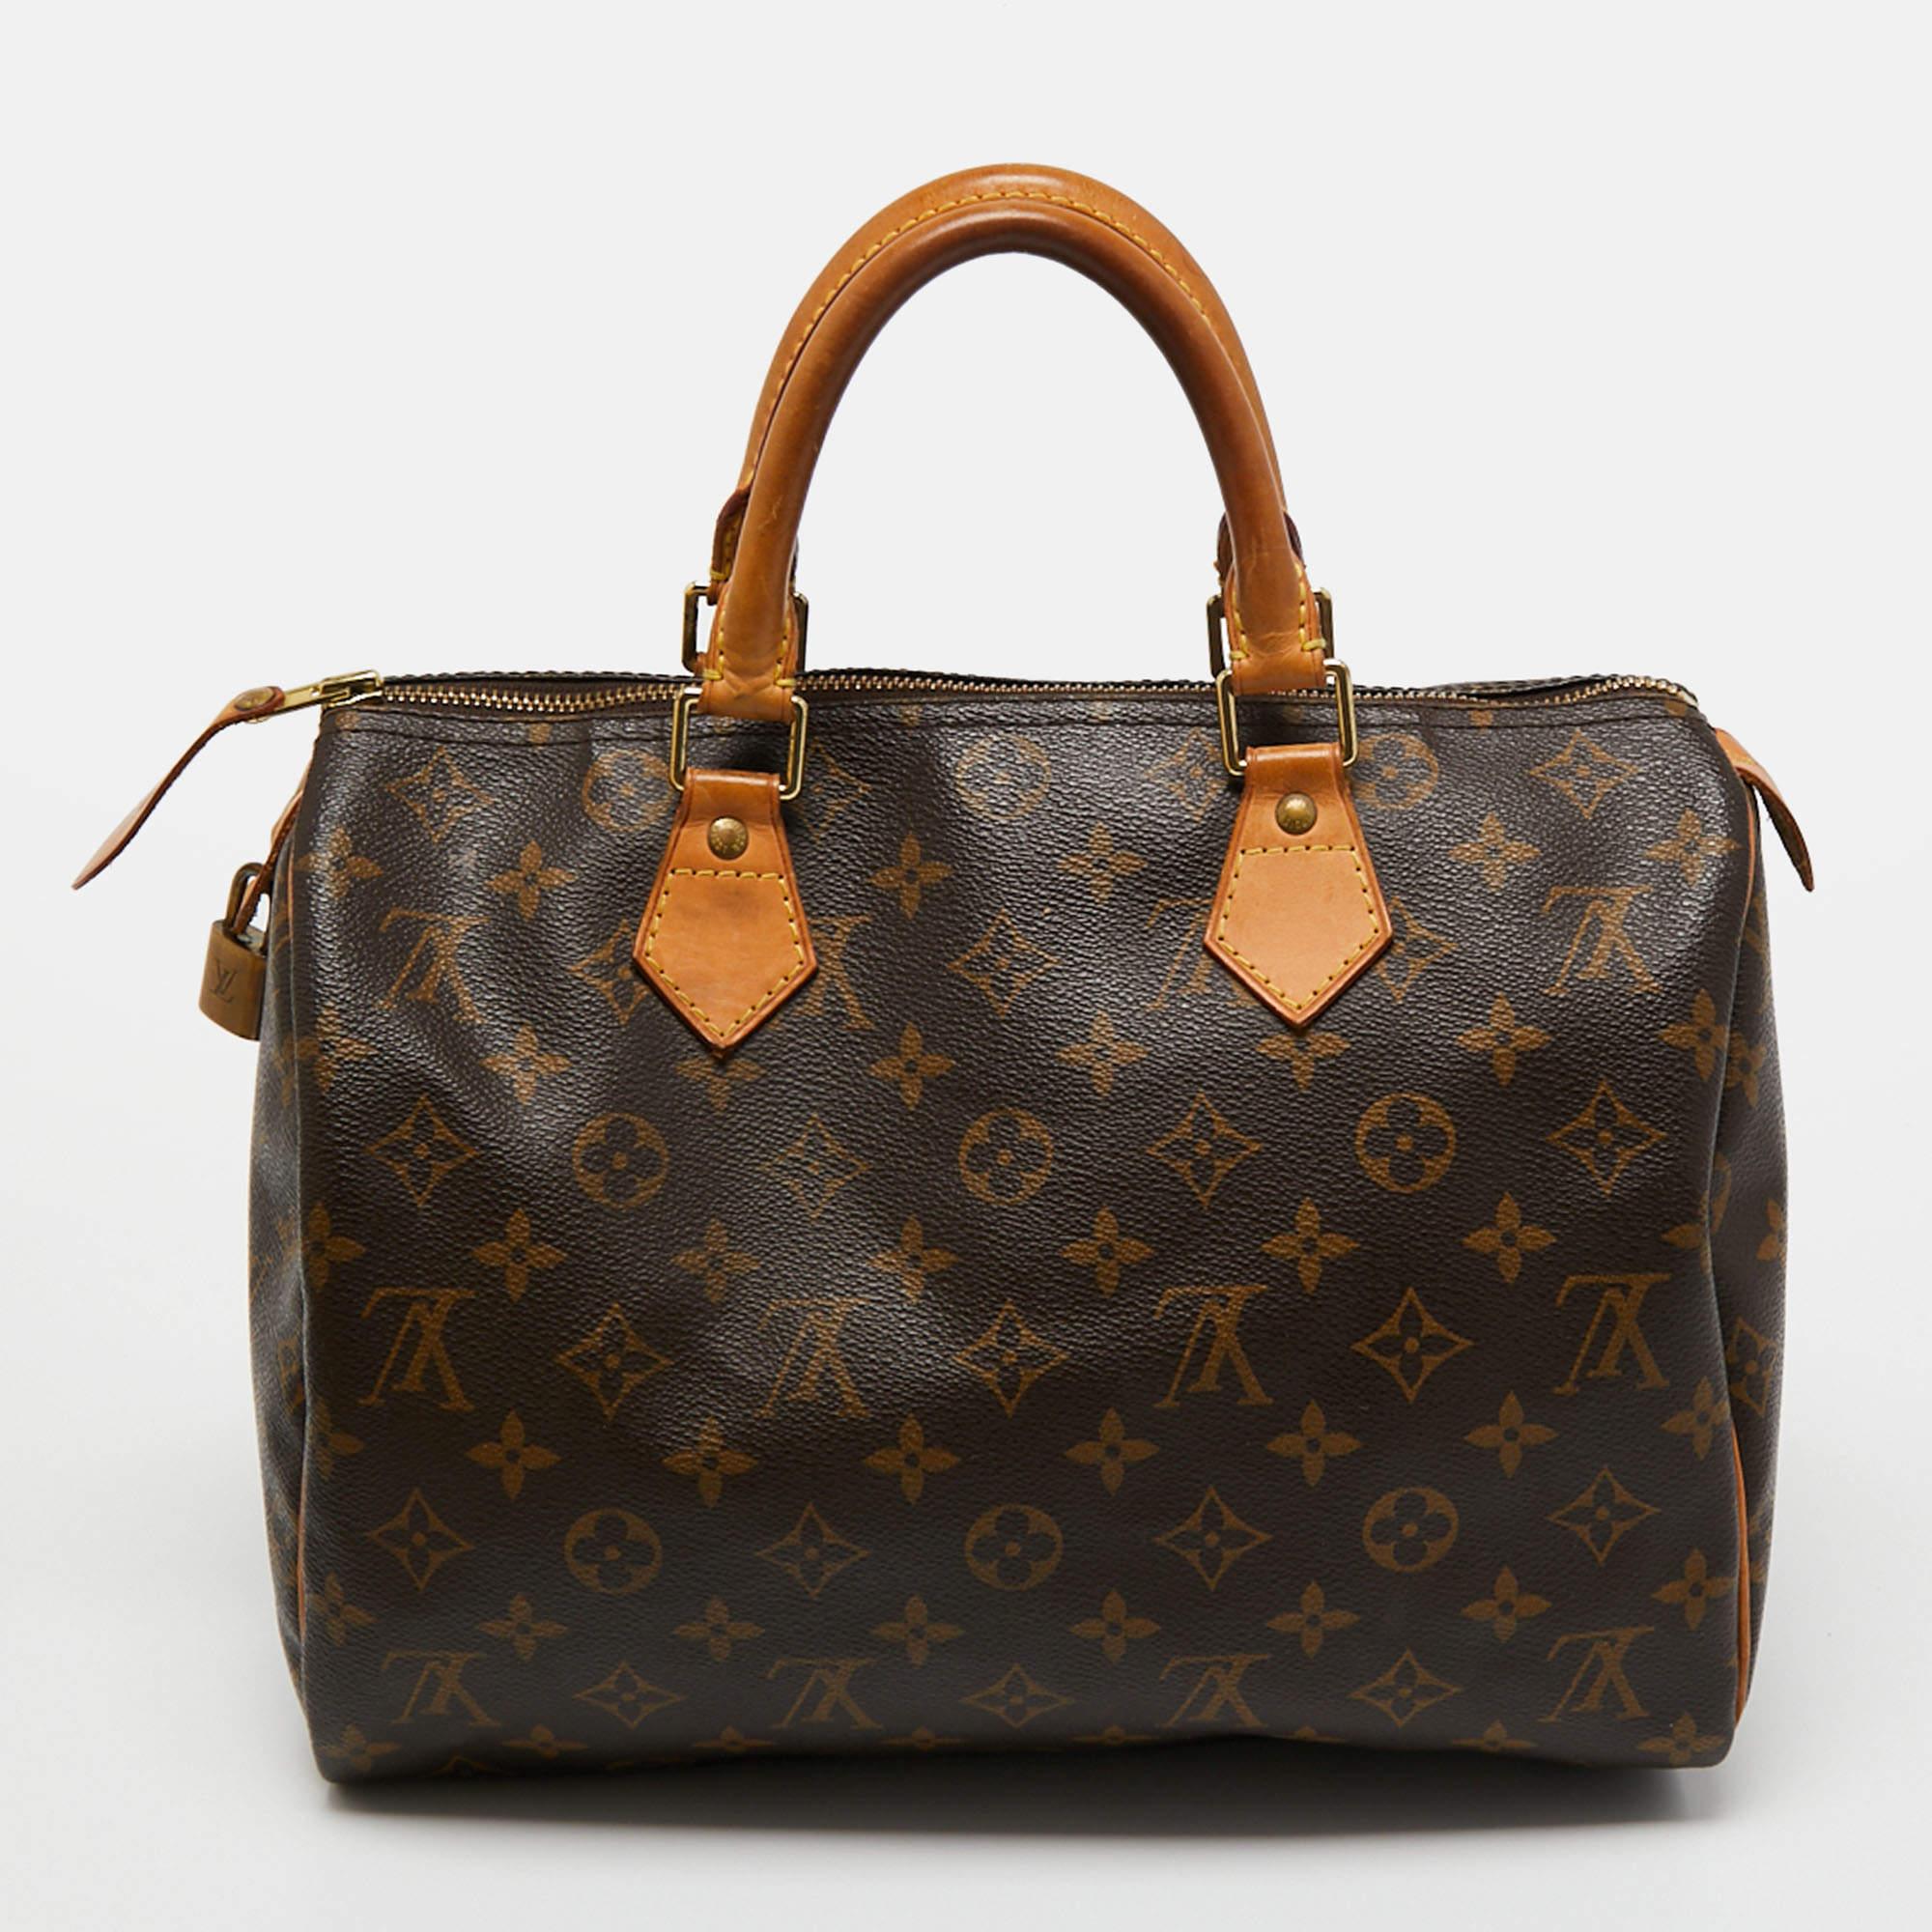 Louis Vuitton's handbags are popular owing to their high style and functionality. This bag, like all their designs, is durable and stylish. Exuding fine finish, the bag is designed to give a luxurious experience. The interior has enough space to